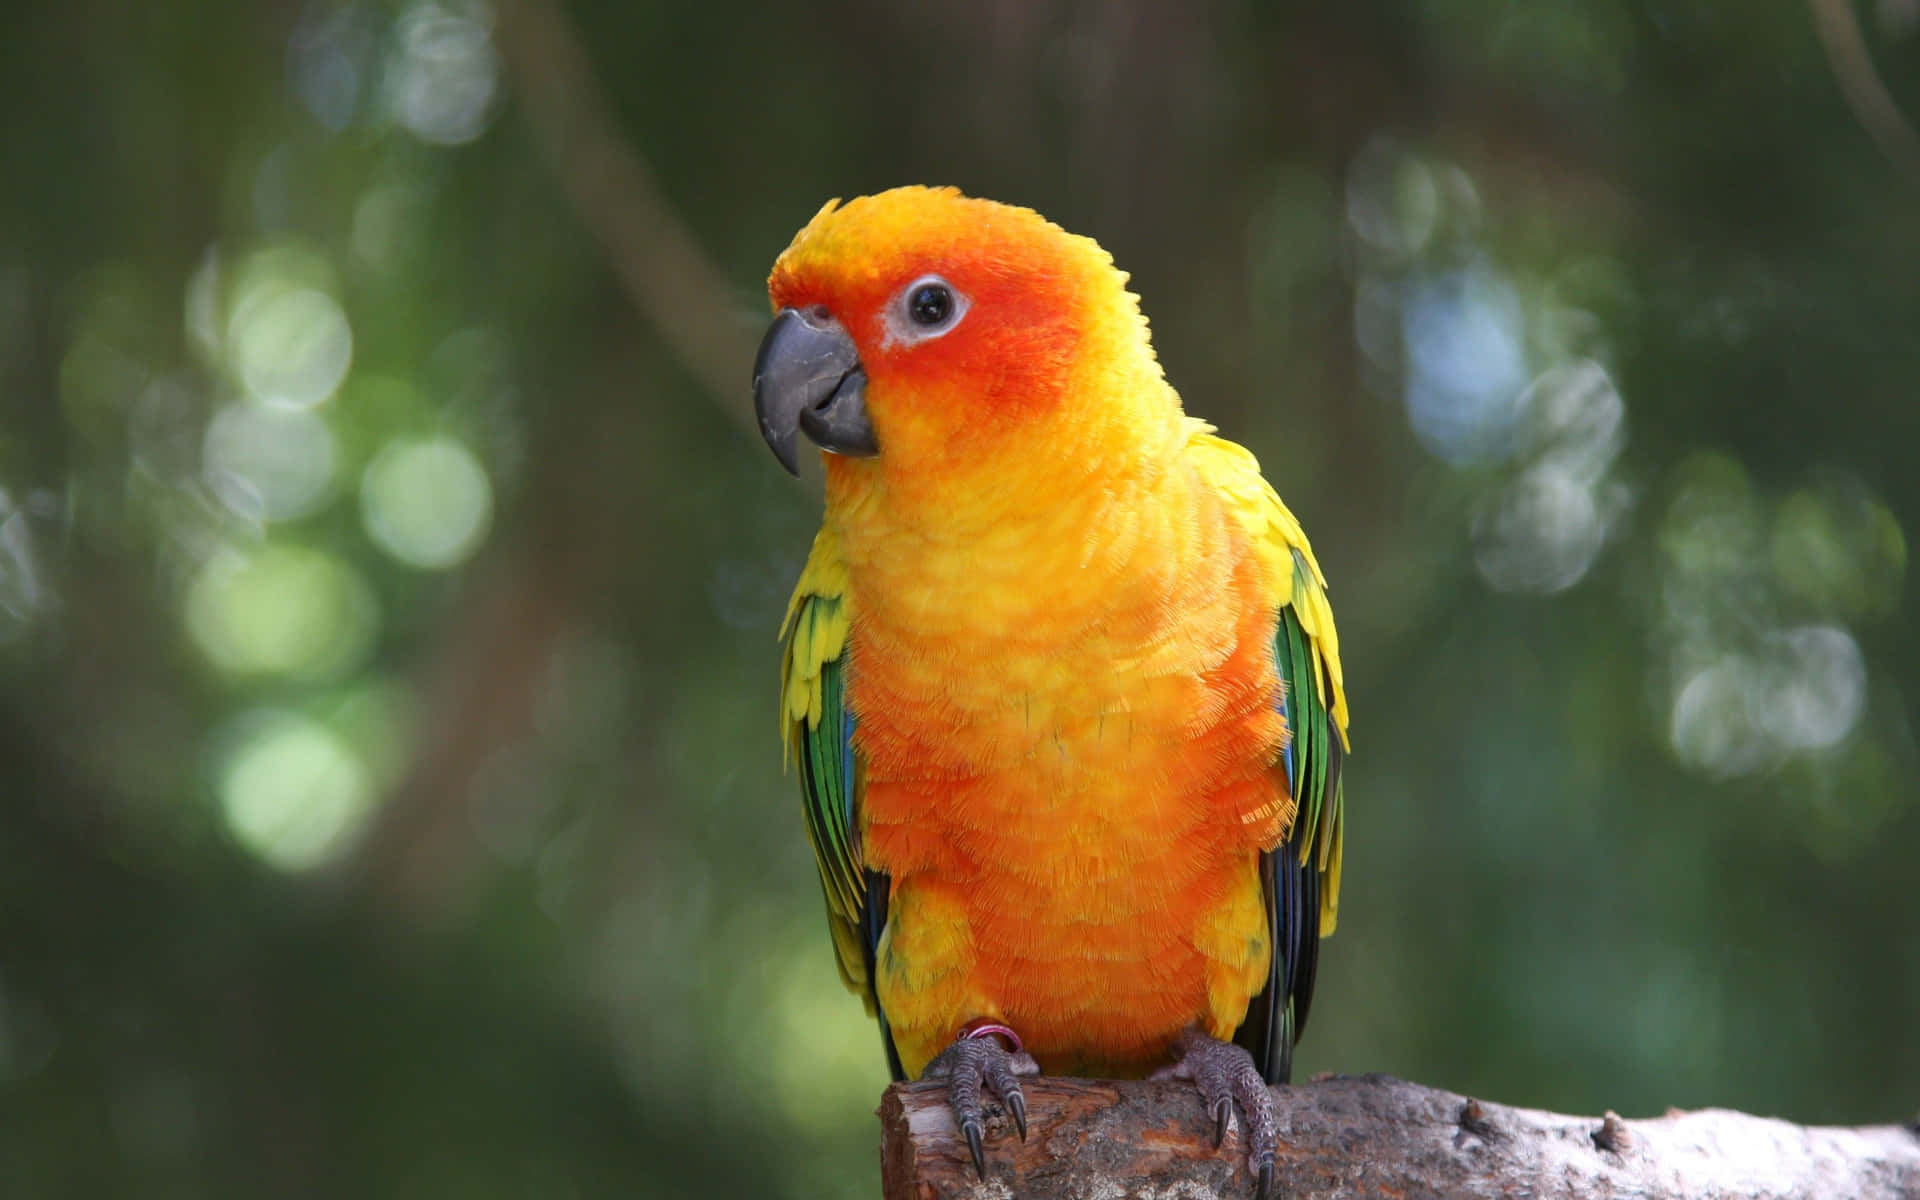 Colorful and beautiful parrot in nature